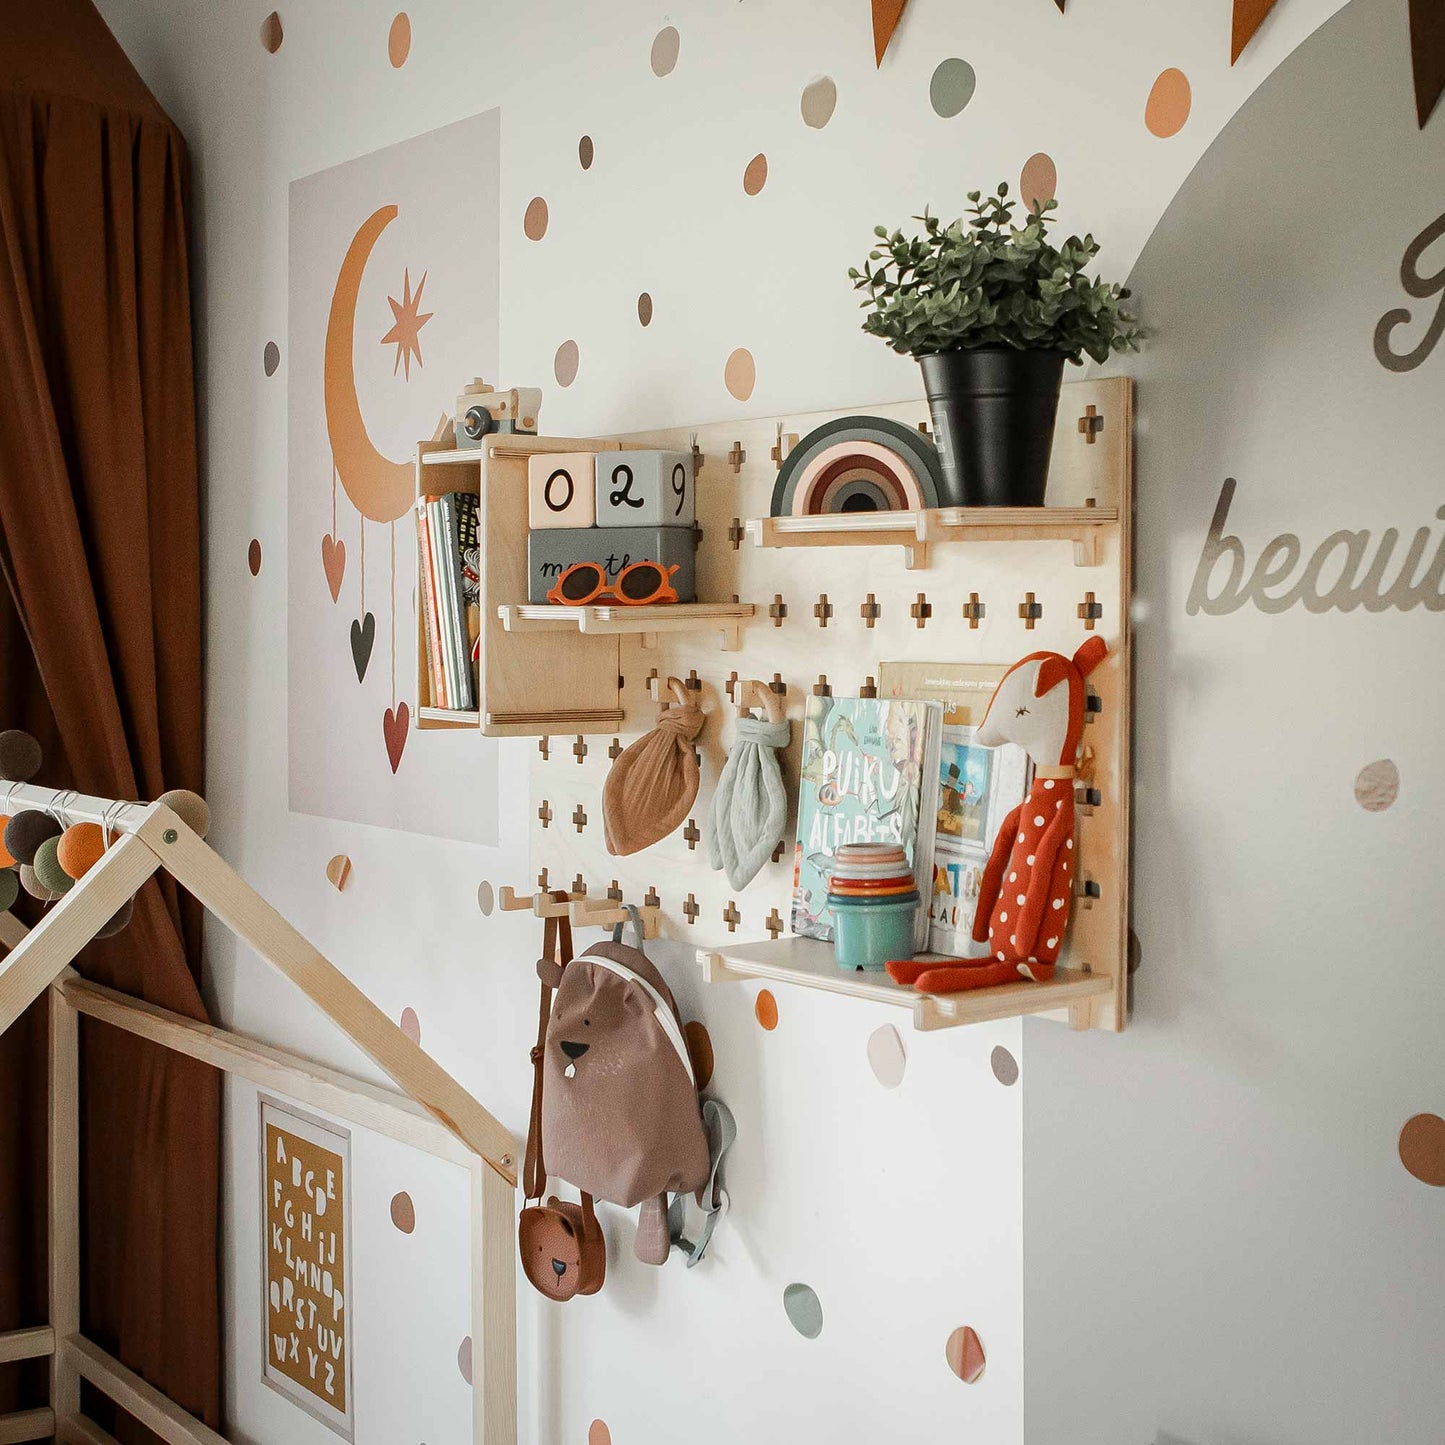 A child's room with a Floating Shelves Pegboard displaying toys, books, and a potted plant. The wall features a moon and stars art piece alongside a polka dot pattern. A customizable storage unit offers adjustable shelves beneath a partially visible wooden house-shaped frame.